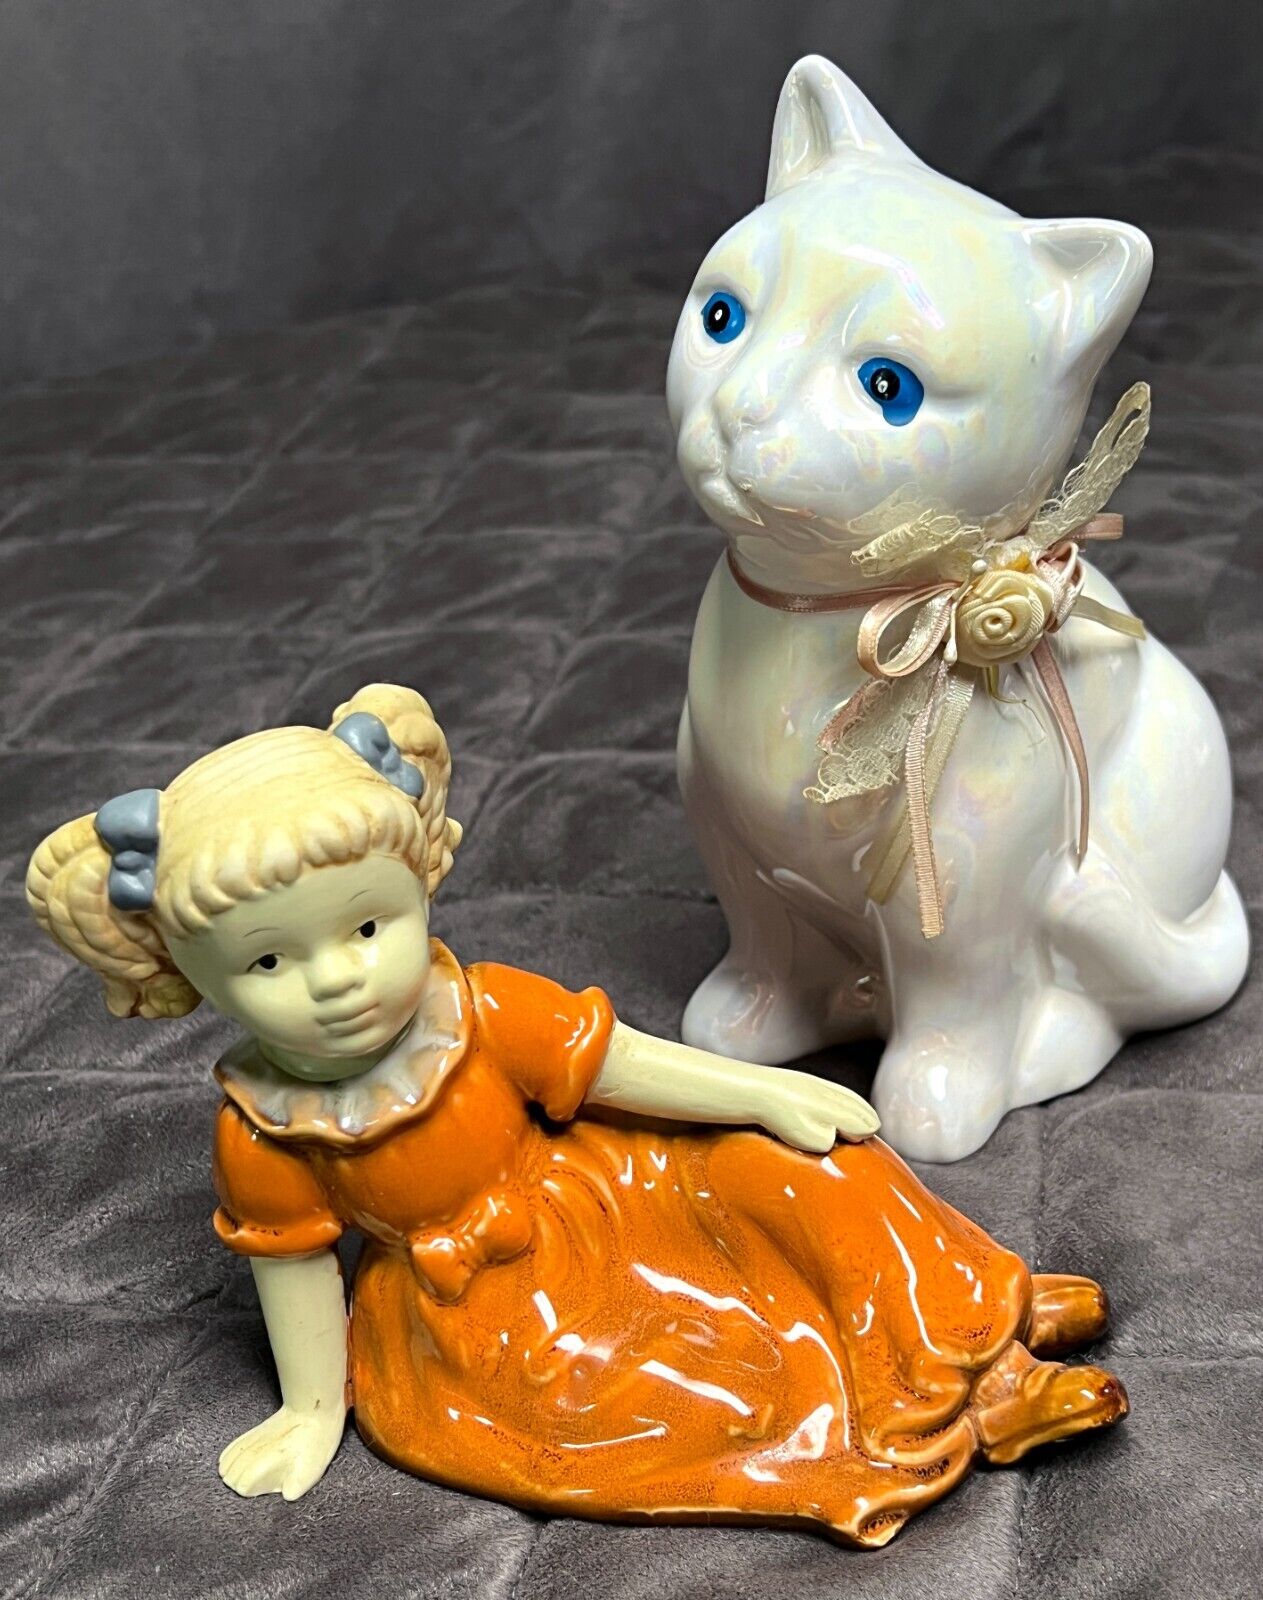 2 Vintage Ceramic Figurines Irresdescent White Cat & Little Girl Pony Tails